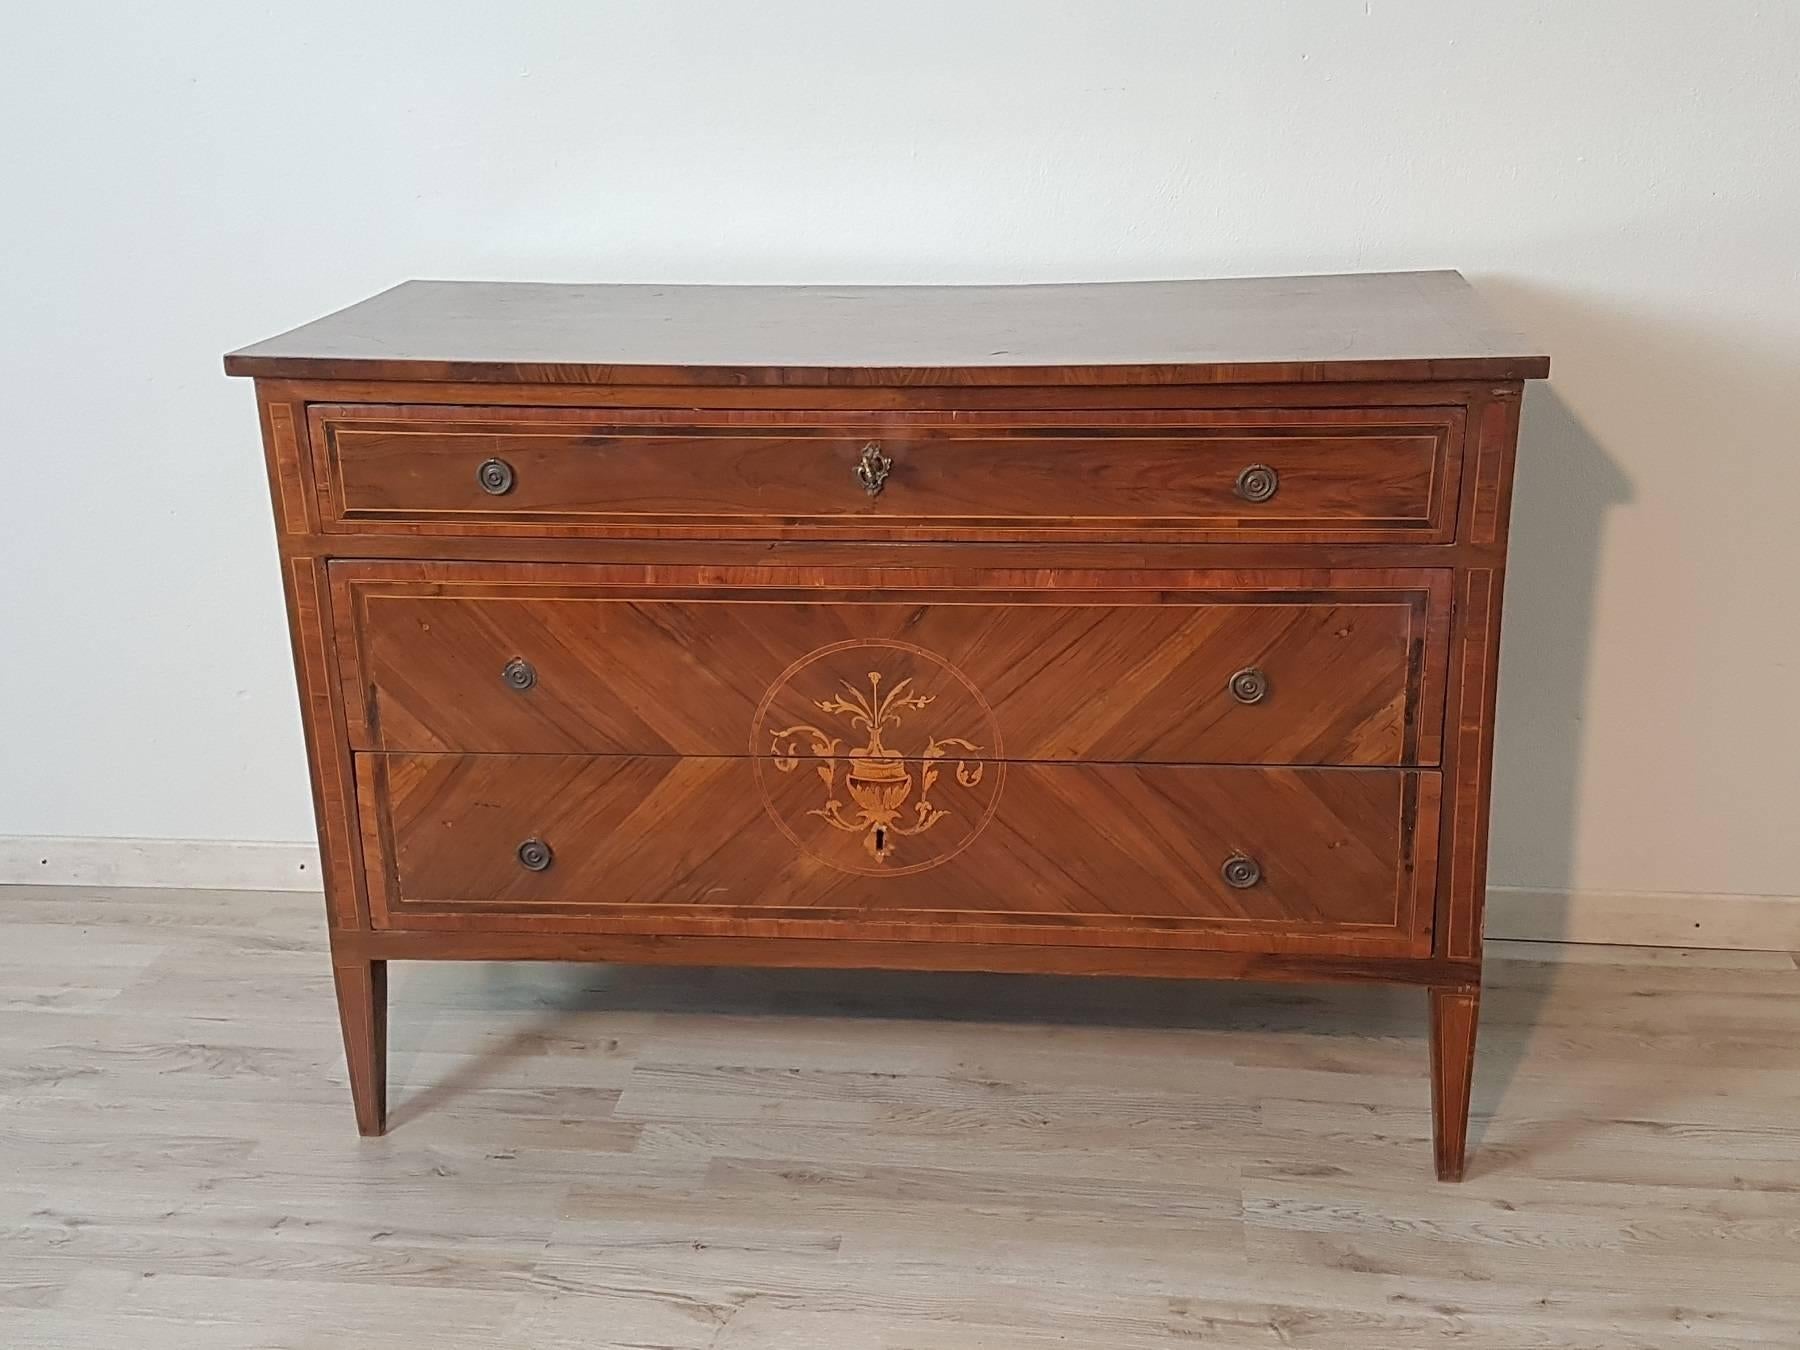 Elegant chest inlaid finely inlay to the school of Maggiolini with essences of various types full period Louis XVI of clear taste and Lombard origin. Period second half of the 18th century. To underline the meticulous work inlay. Its small size,